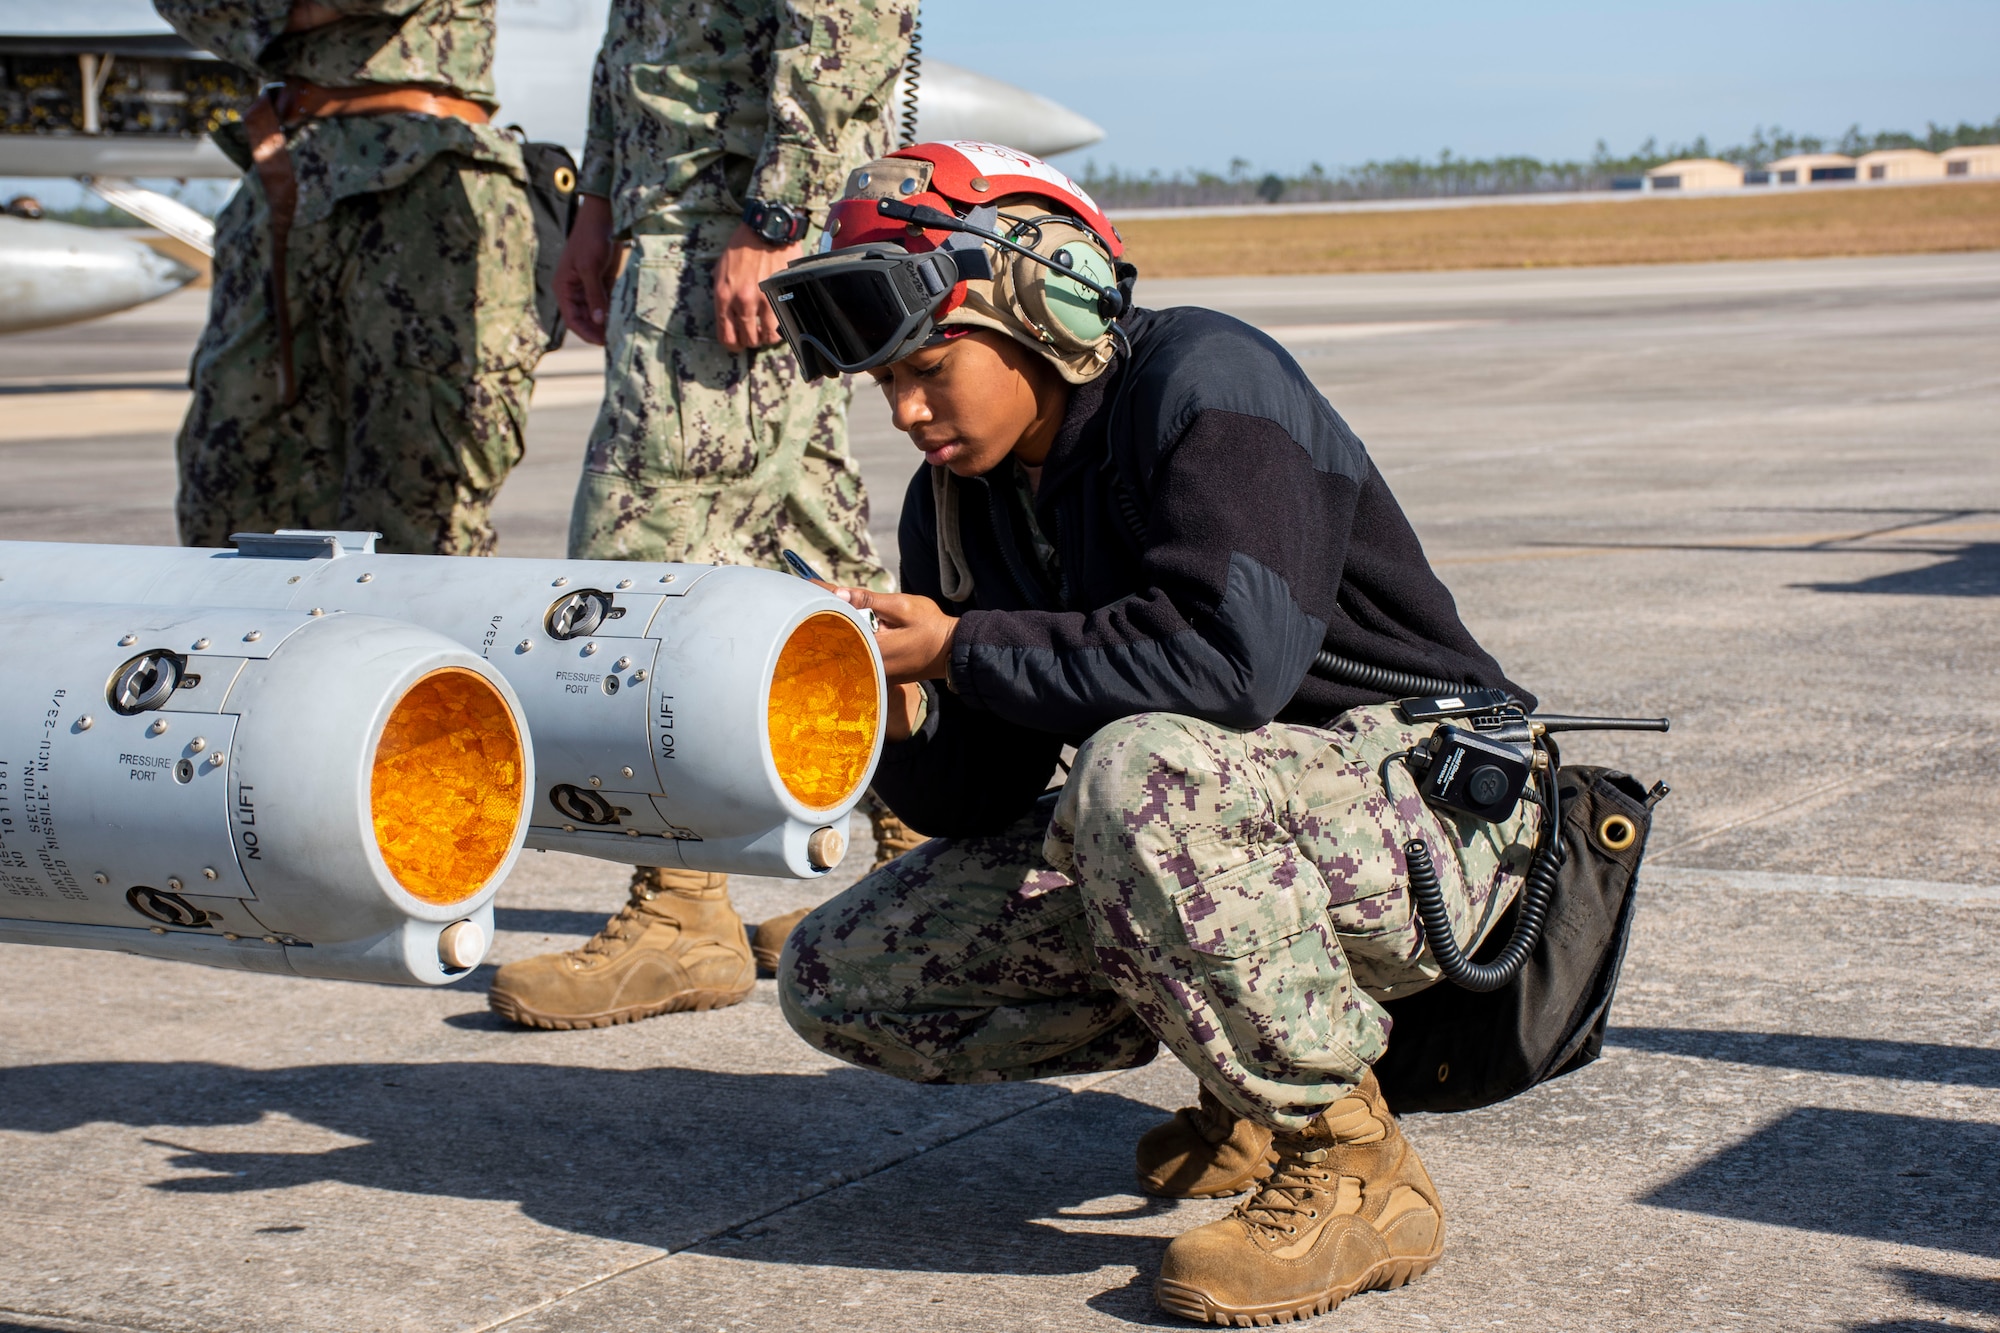 An Aviation Ordnanceman attached to Strike Fighter Squadron 94 inspects two AIM-120 AMRAAMs before a live-fire mission at Tyndall AFB, Fla., Nov. 10, 2021. During WSEP, units across the Department of Defense are evaluated on air-to-air combat capabilities.  (U.S. Air Force photo by 1st Lt Lindsey Heflin)